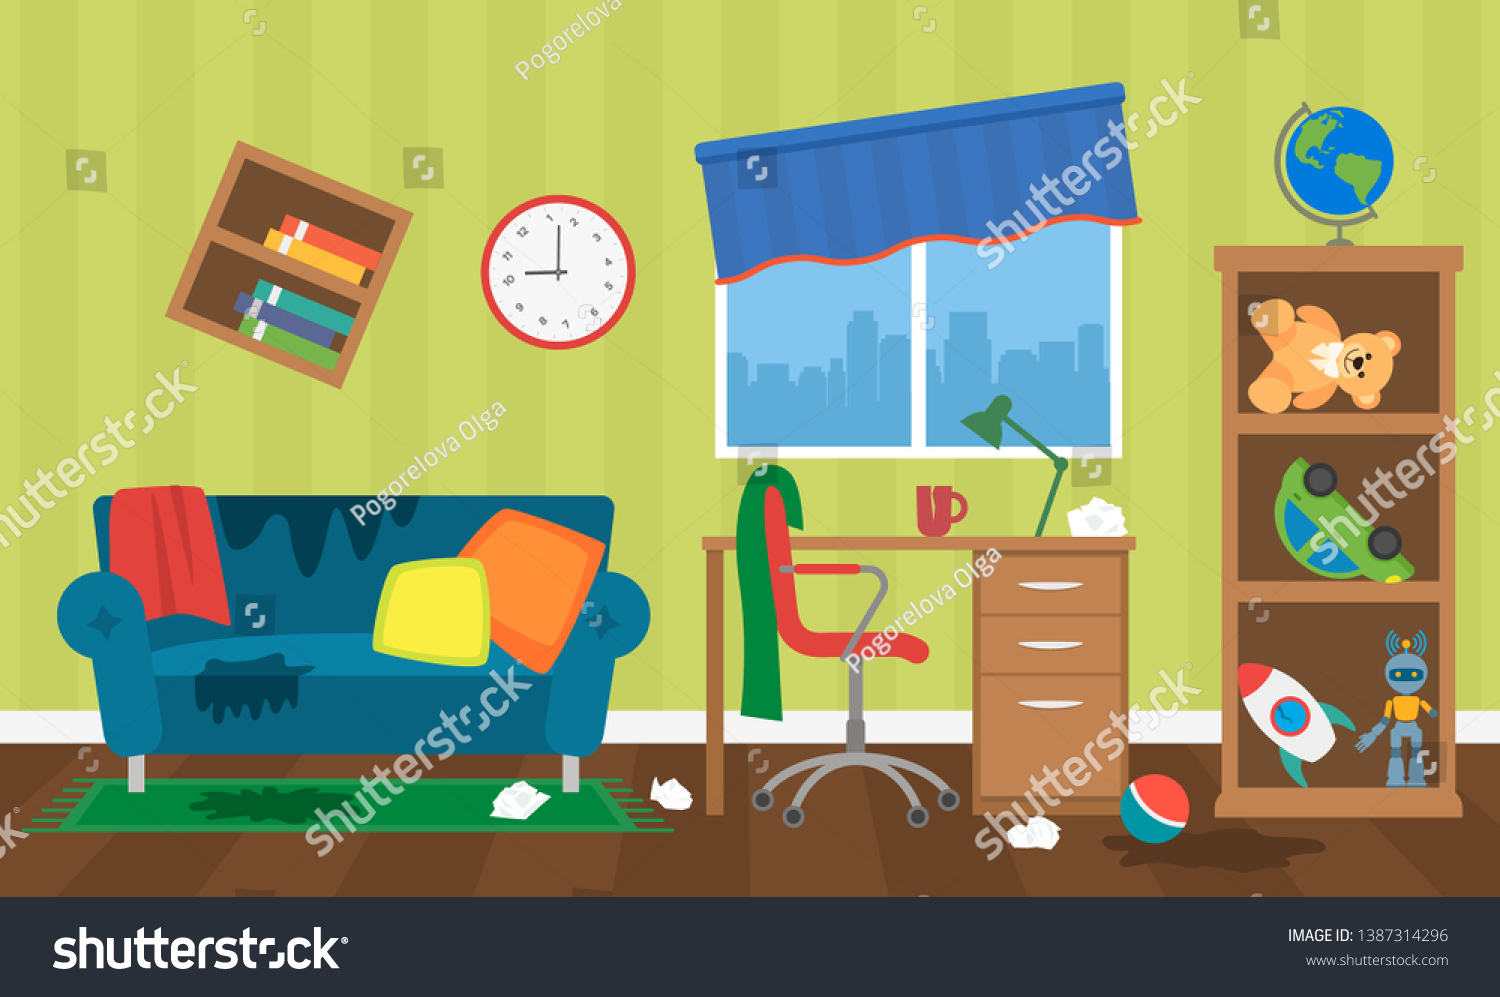 Mess Childrens Room Toys Furniture Window Royalty Free Stock Image